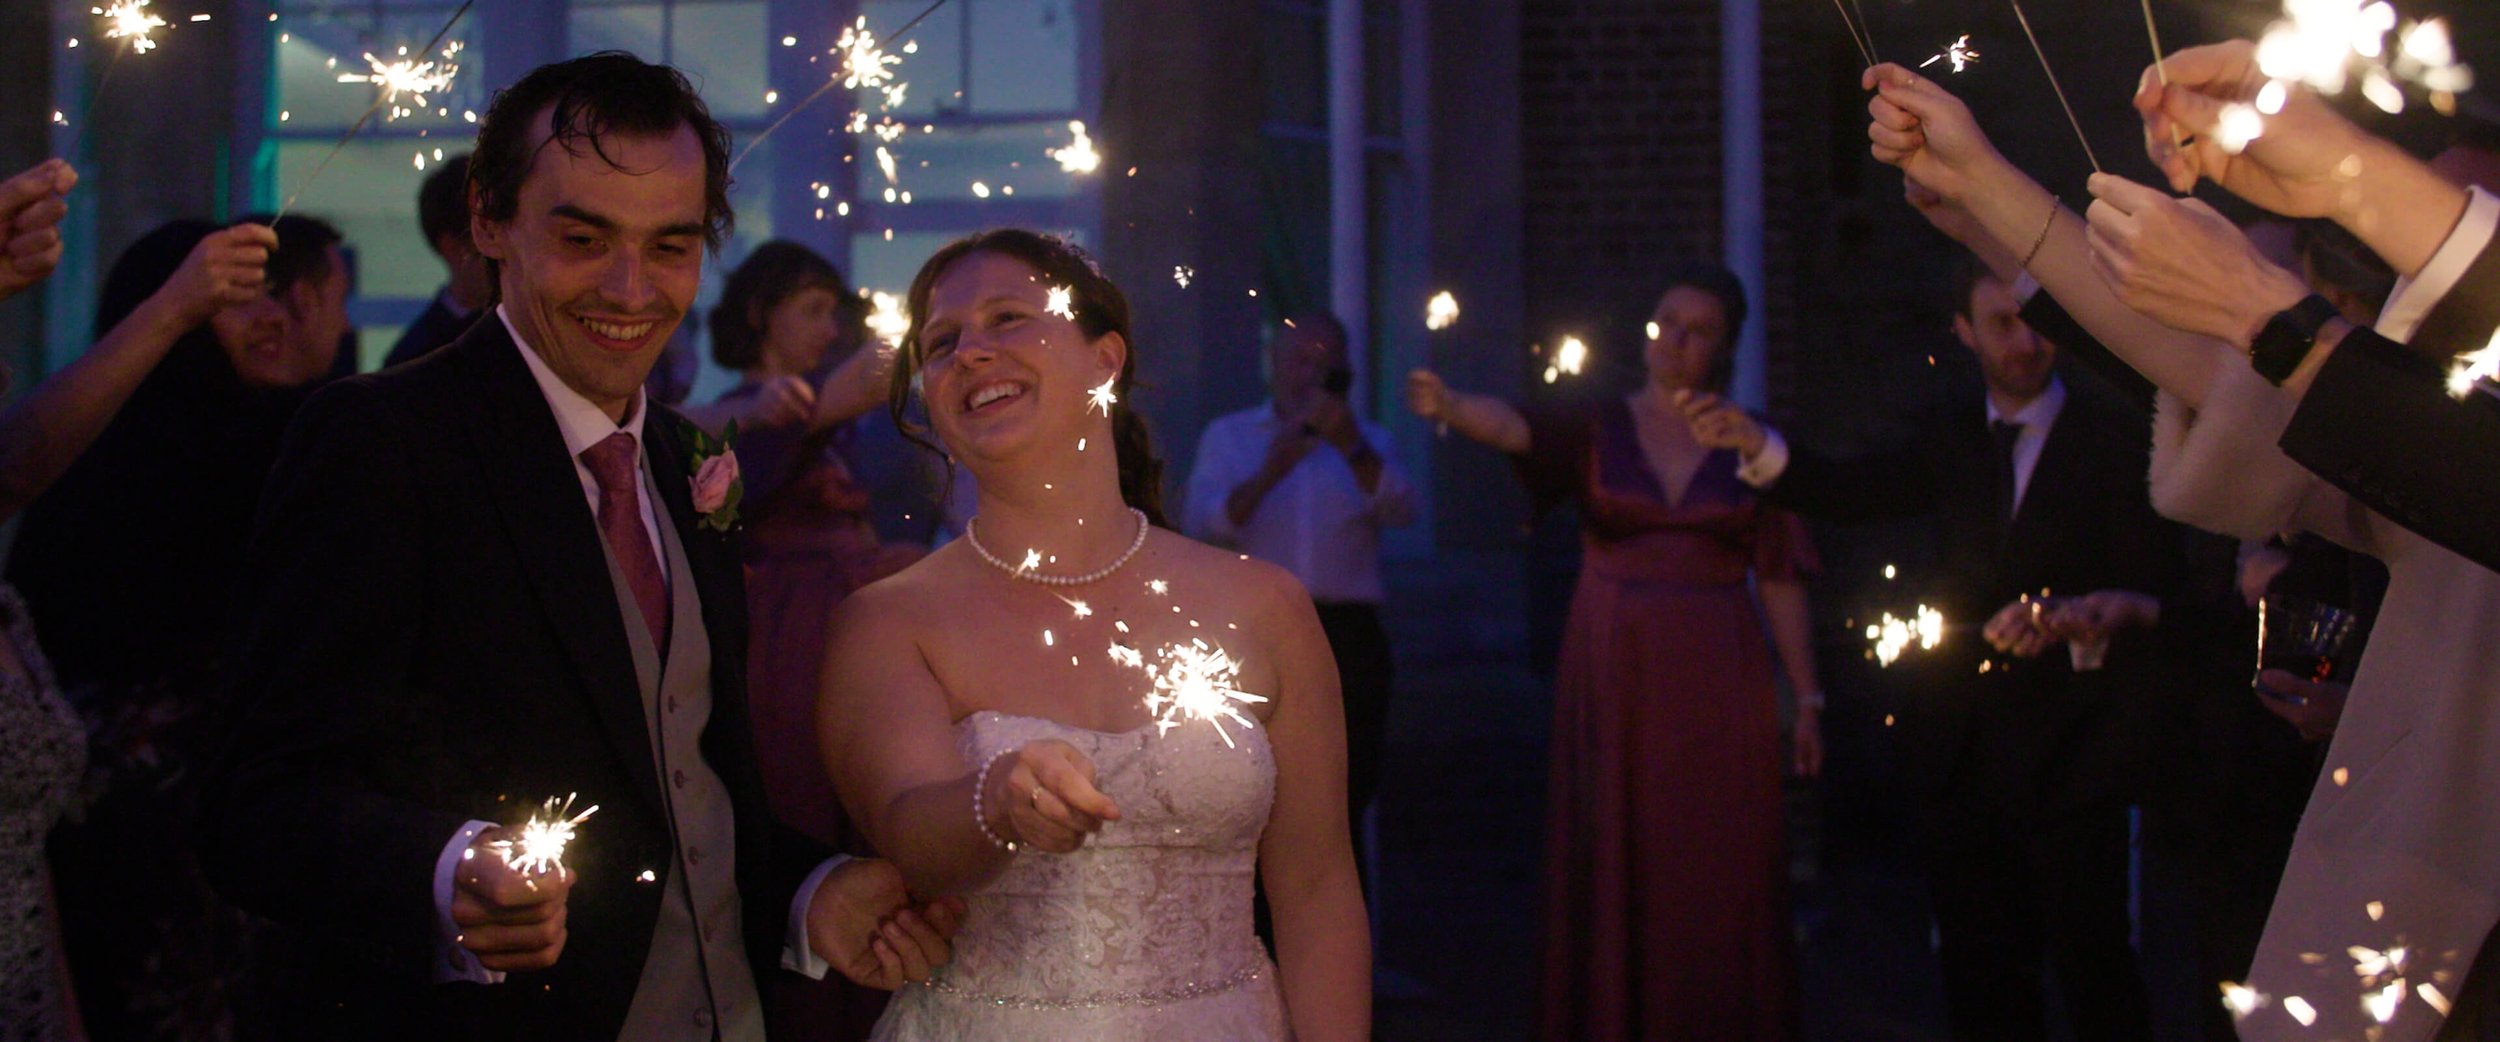 Amy &amp; Stephen joyfully play with sparklers surrounded by their wedding guests